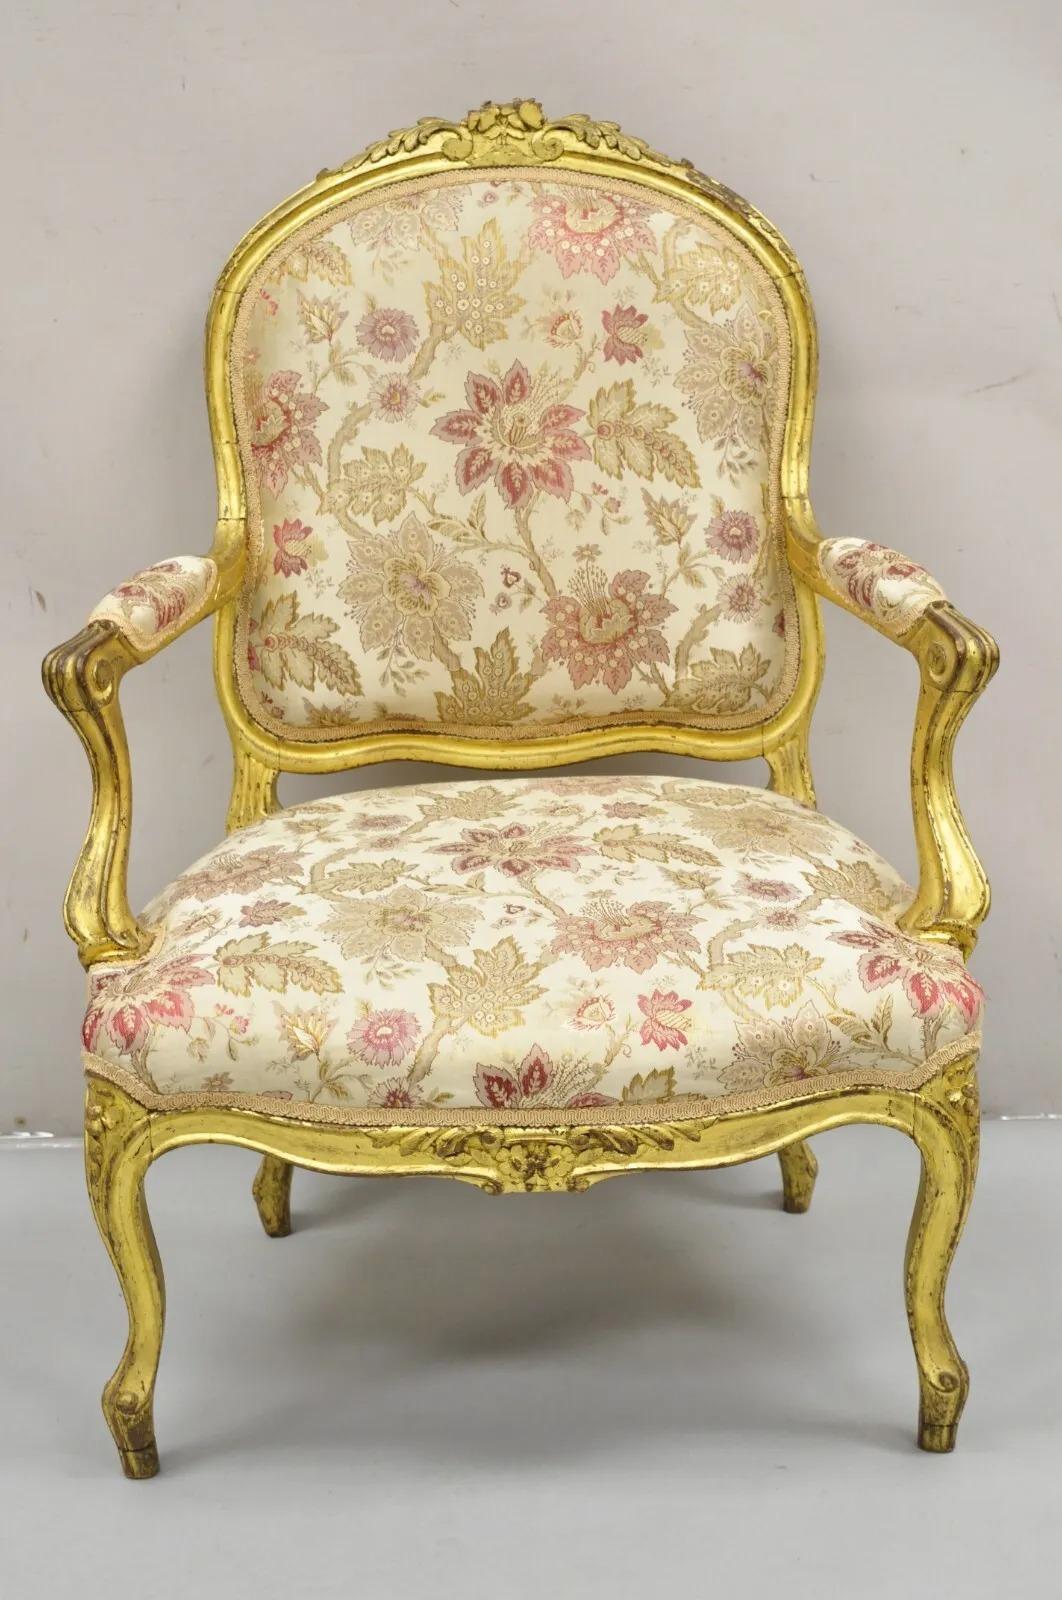 Antique French Louis XV Style Gold Giltwood Floral Carved Upholstered Arm Chair In Good Condition For Sale In Philadelphia, PA